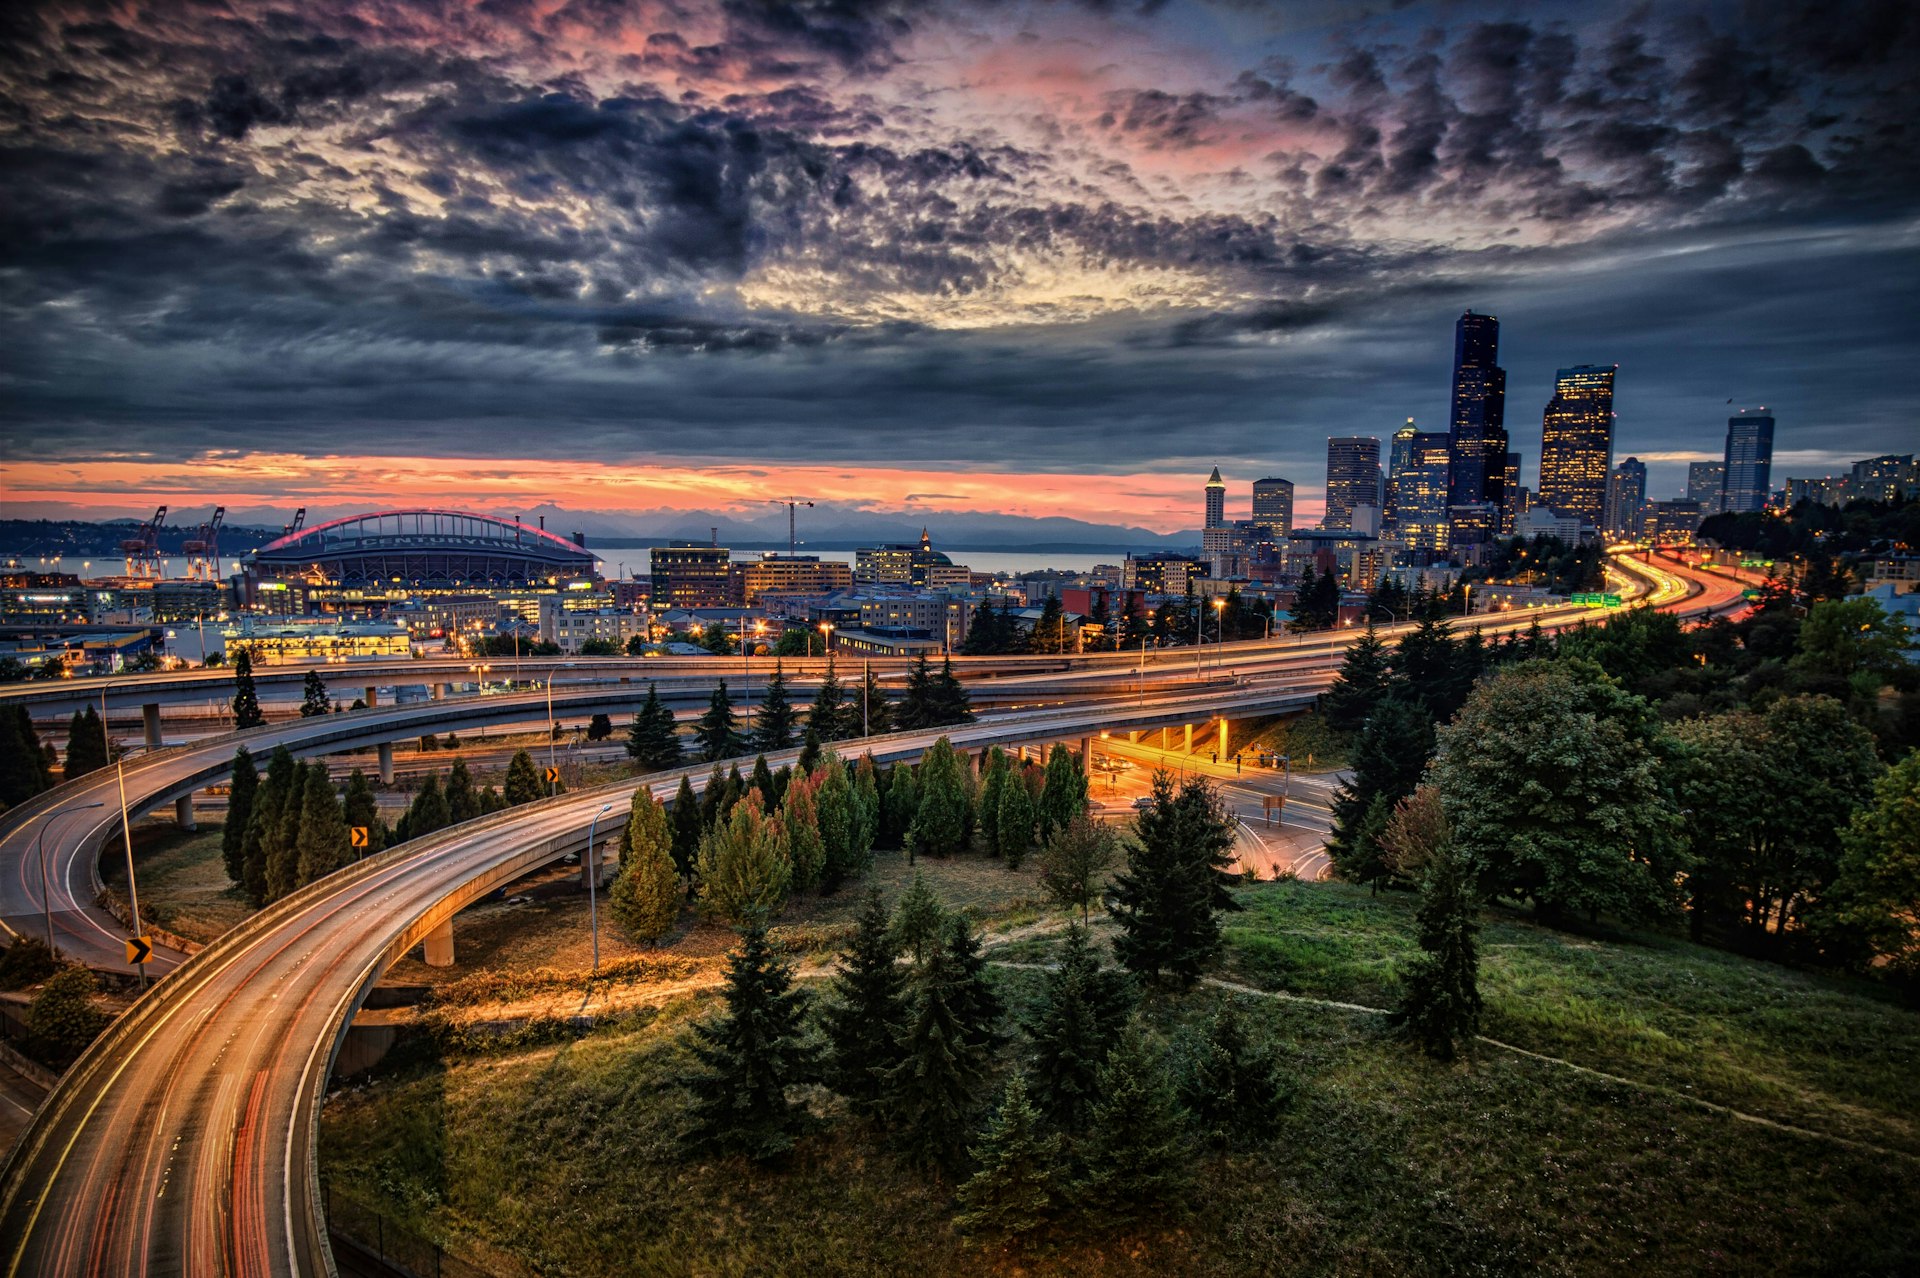 The Seattle skyline at sunset. Image by  Michael Riffle / Moment Select / Getty